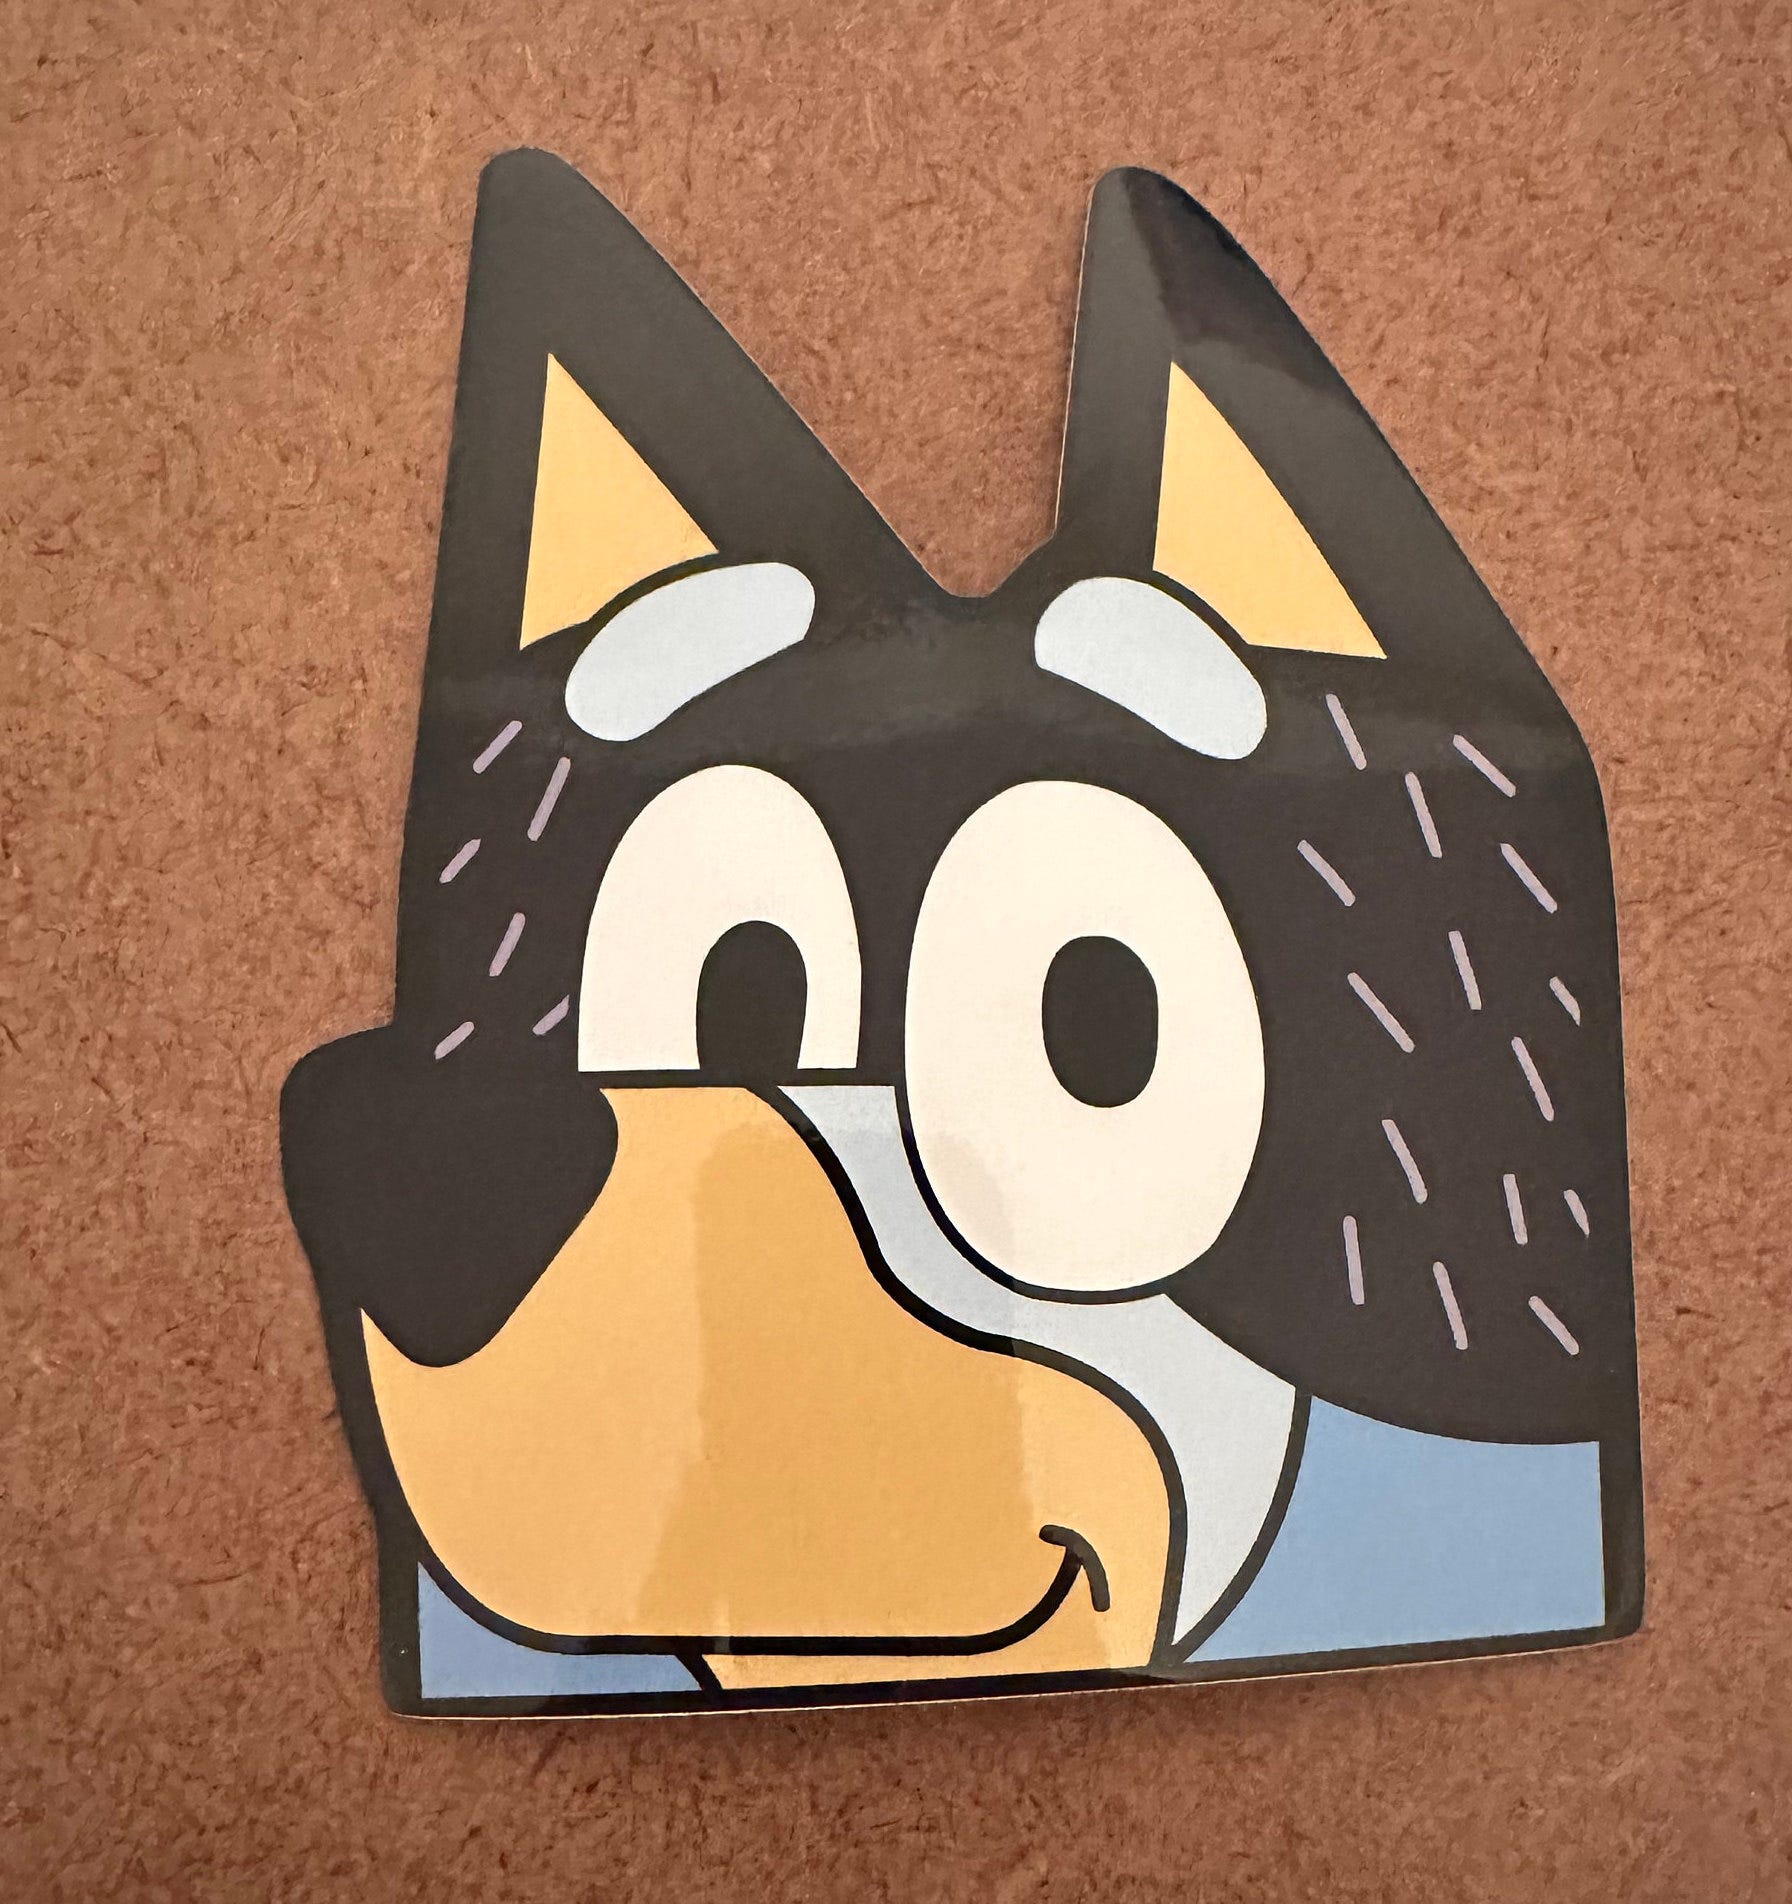 Blue bandit dad dog peeker| family peeker stickers| funny decal| truck decals| car window sticker decal| blue dog stickers